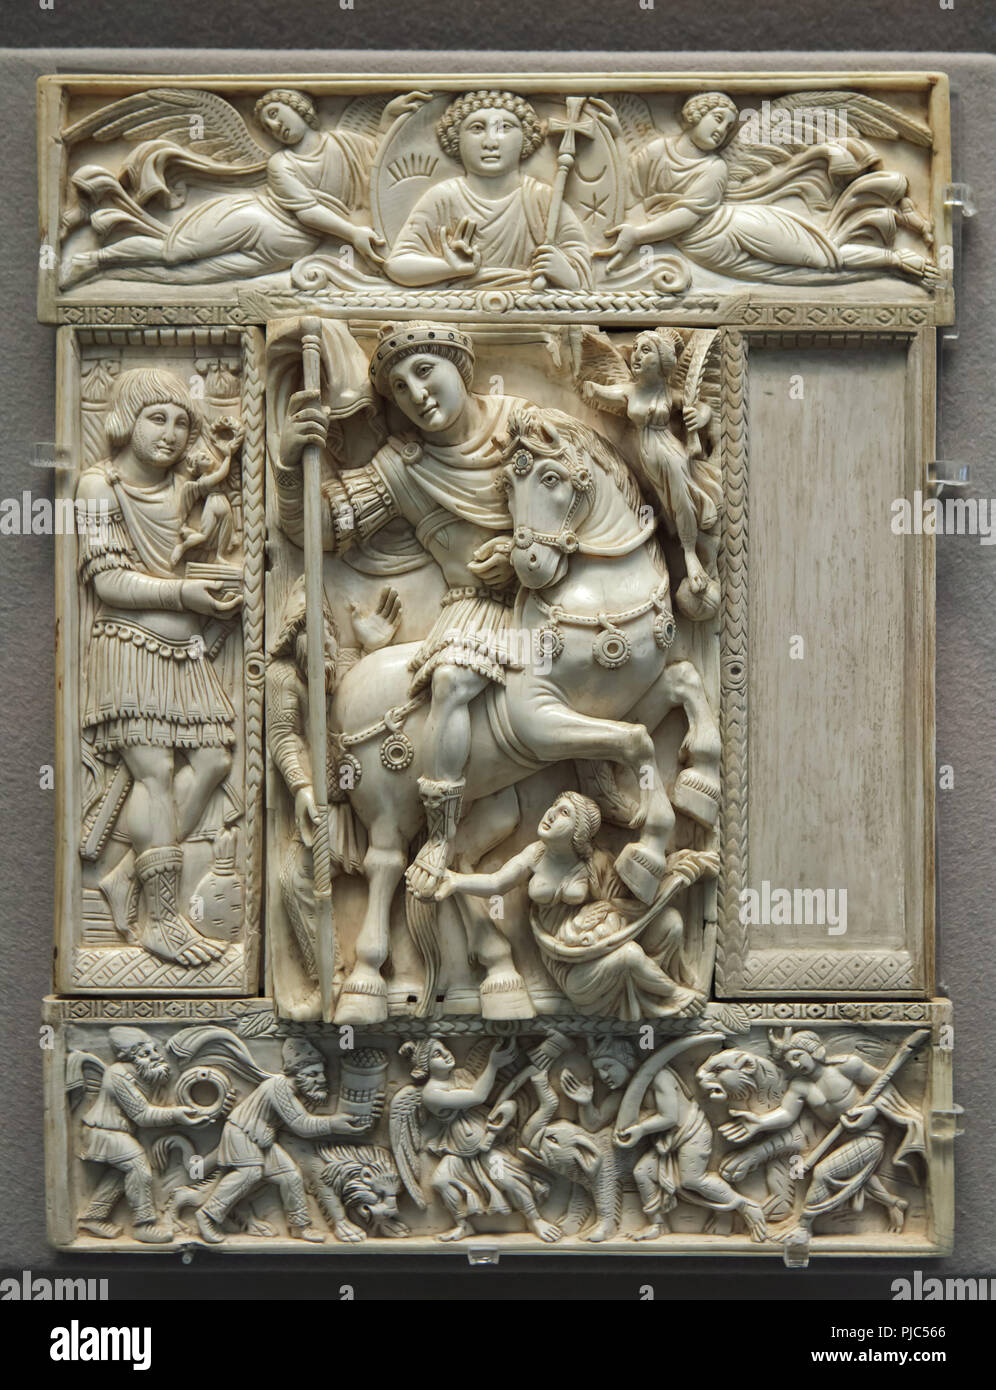 Barberini ivory on display in the Louvre Museum in Paris, France. The Byzantine ivory leaf dated from the first half of the 6th century represents the emperor as triumphant victor, usually identified as Emperor Justinian, or possibly Anastasius I Dicorus or Zeno. Stock Photo